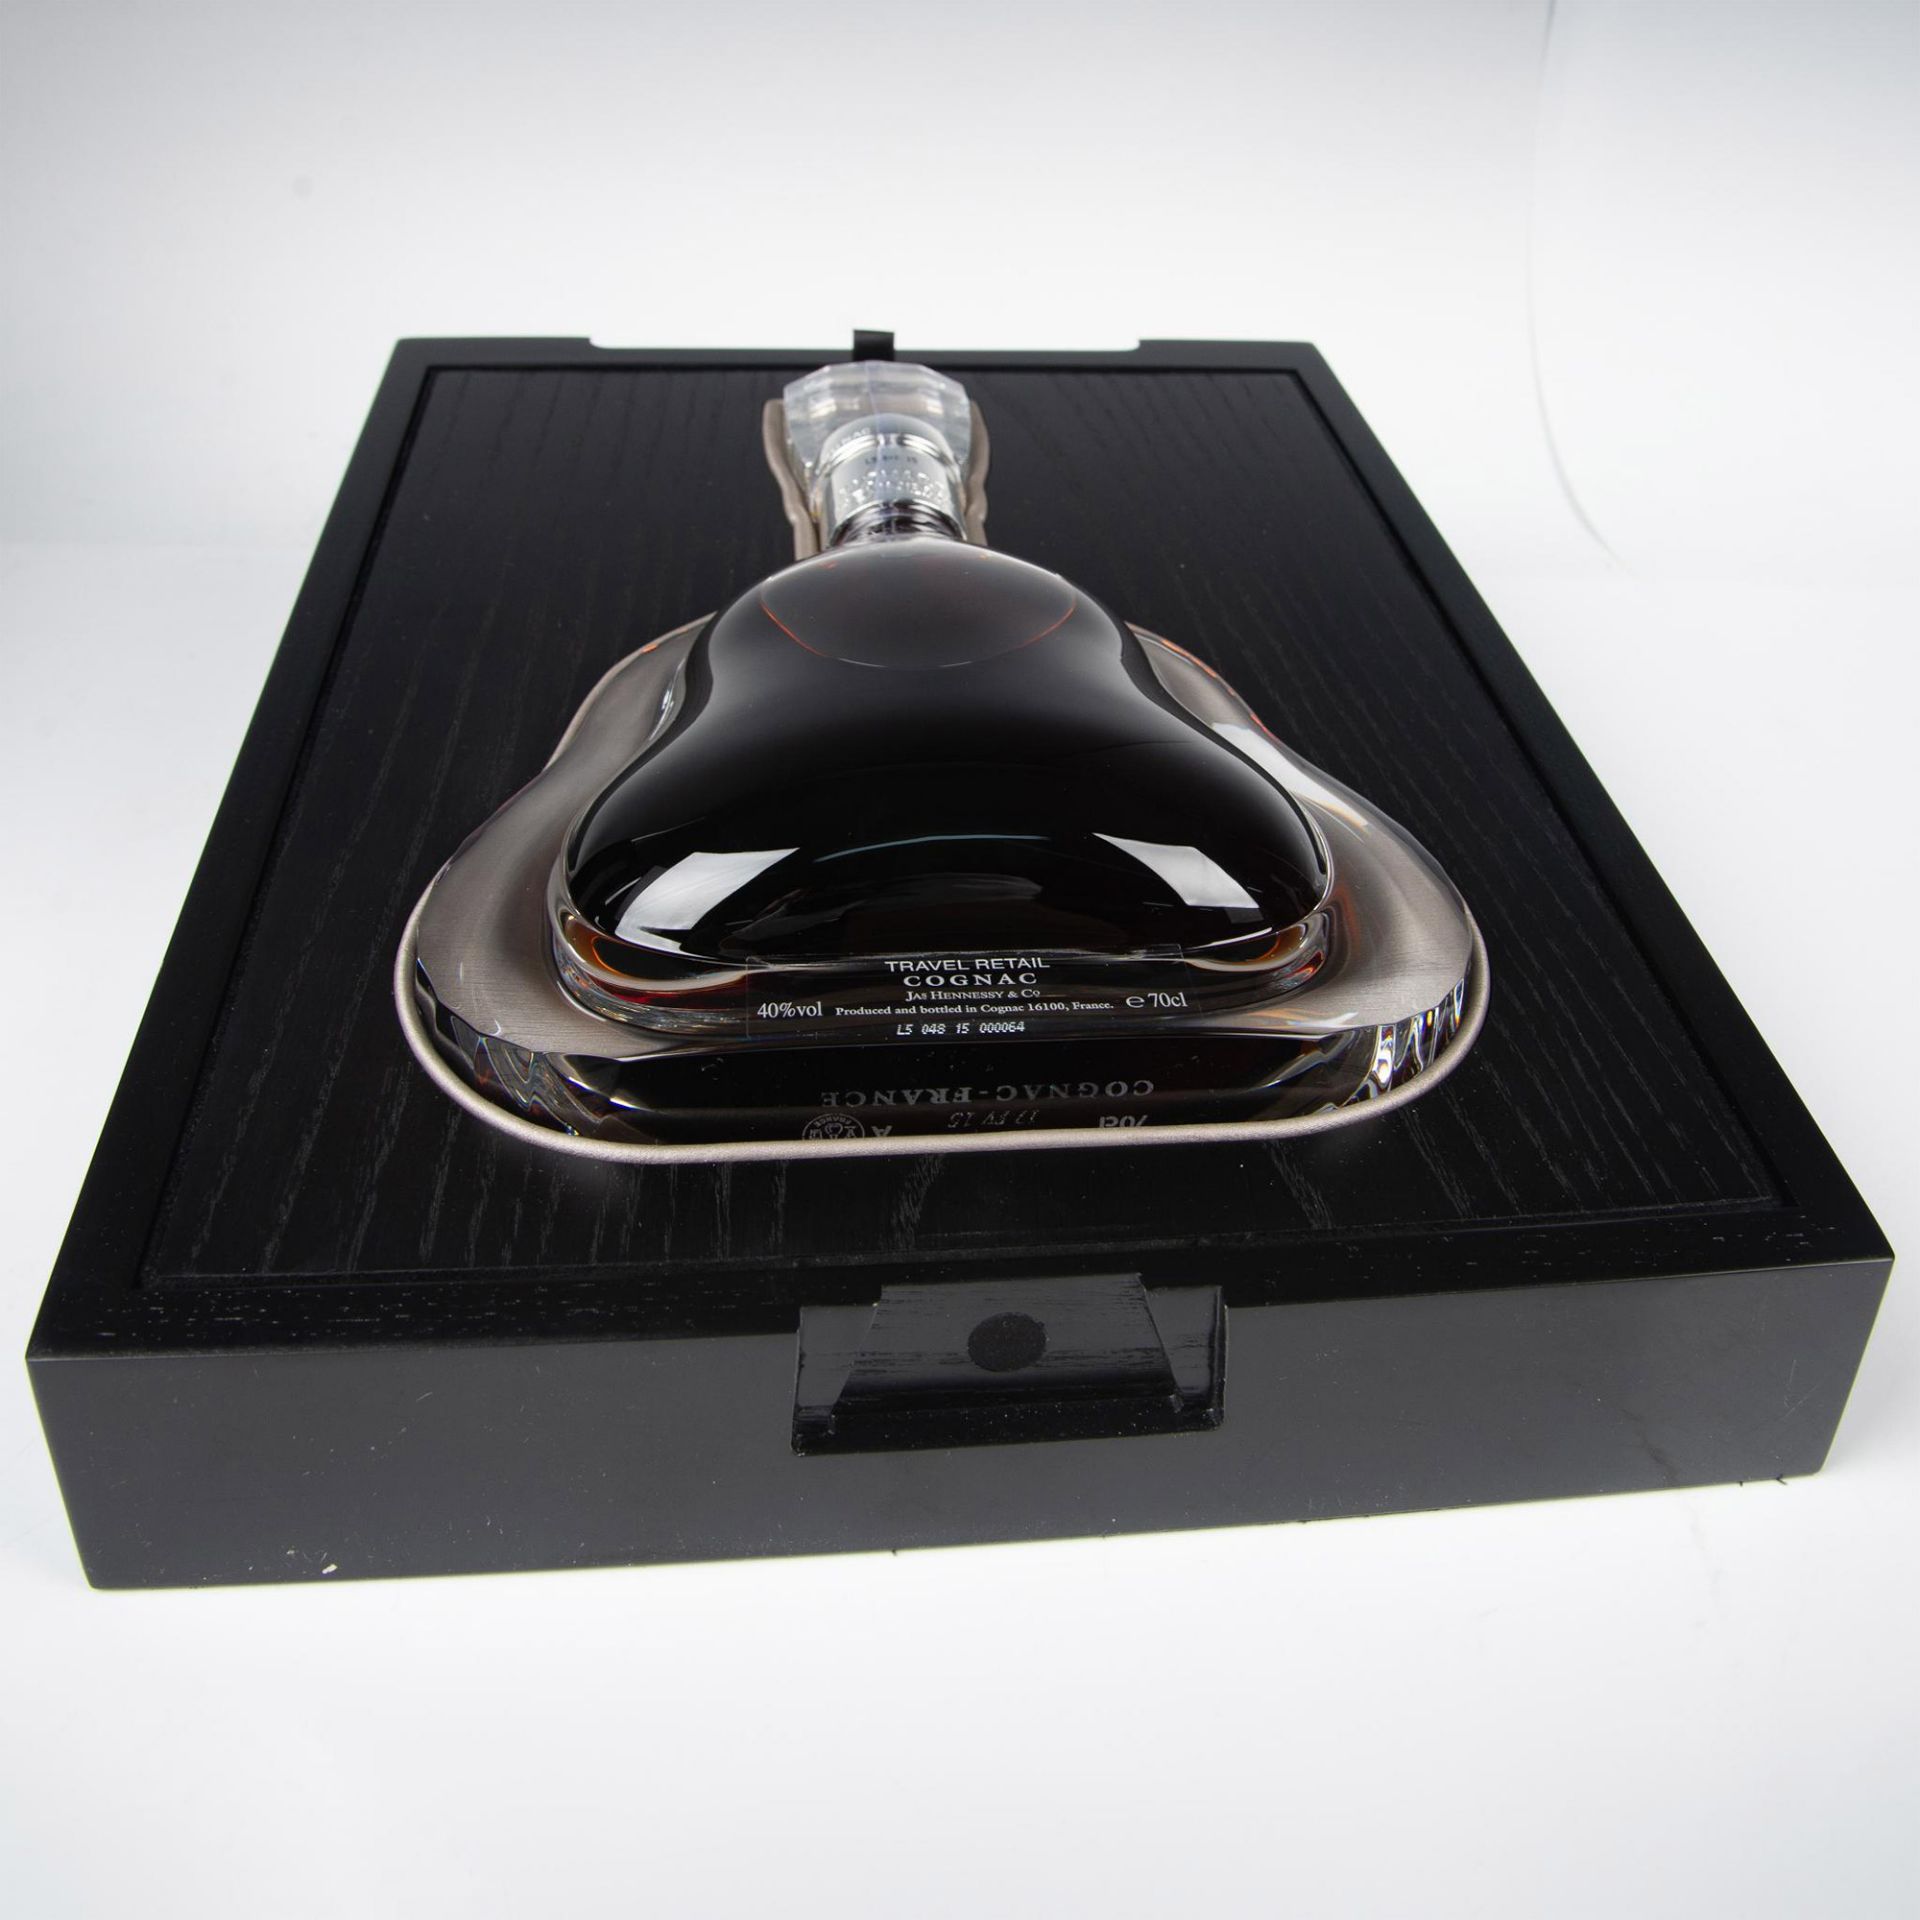 Richard Hennessy & Co. Cognac, Baccarat Crystal - Image 13 of 19